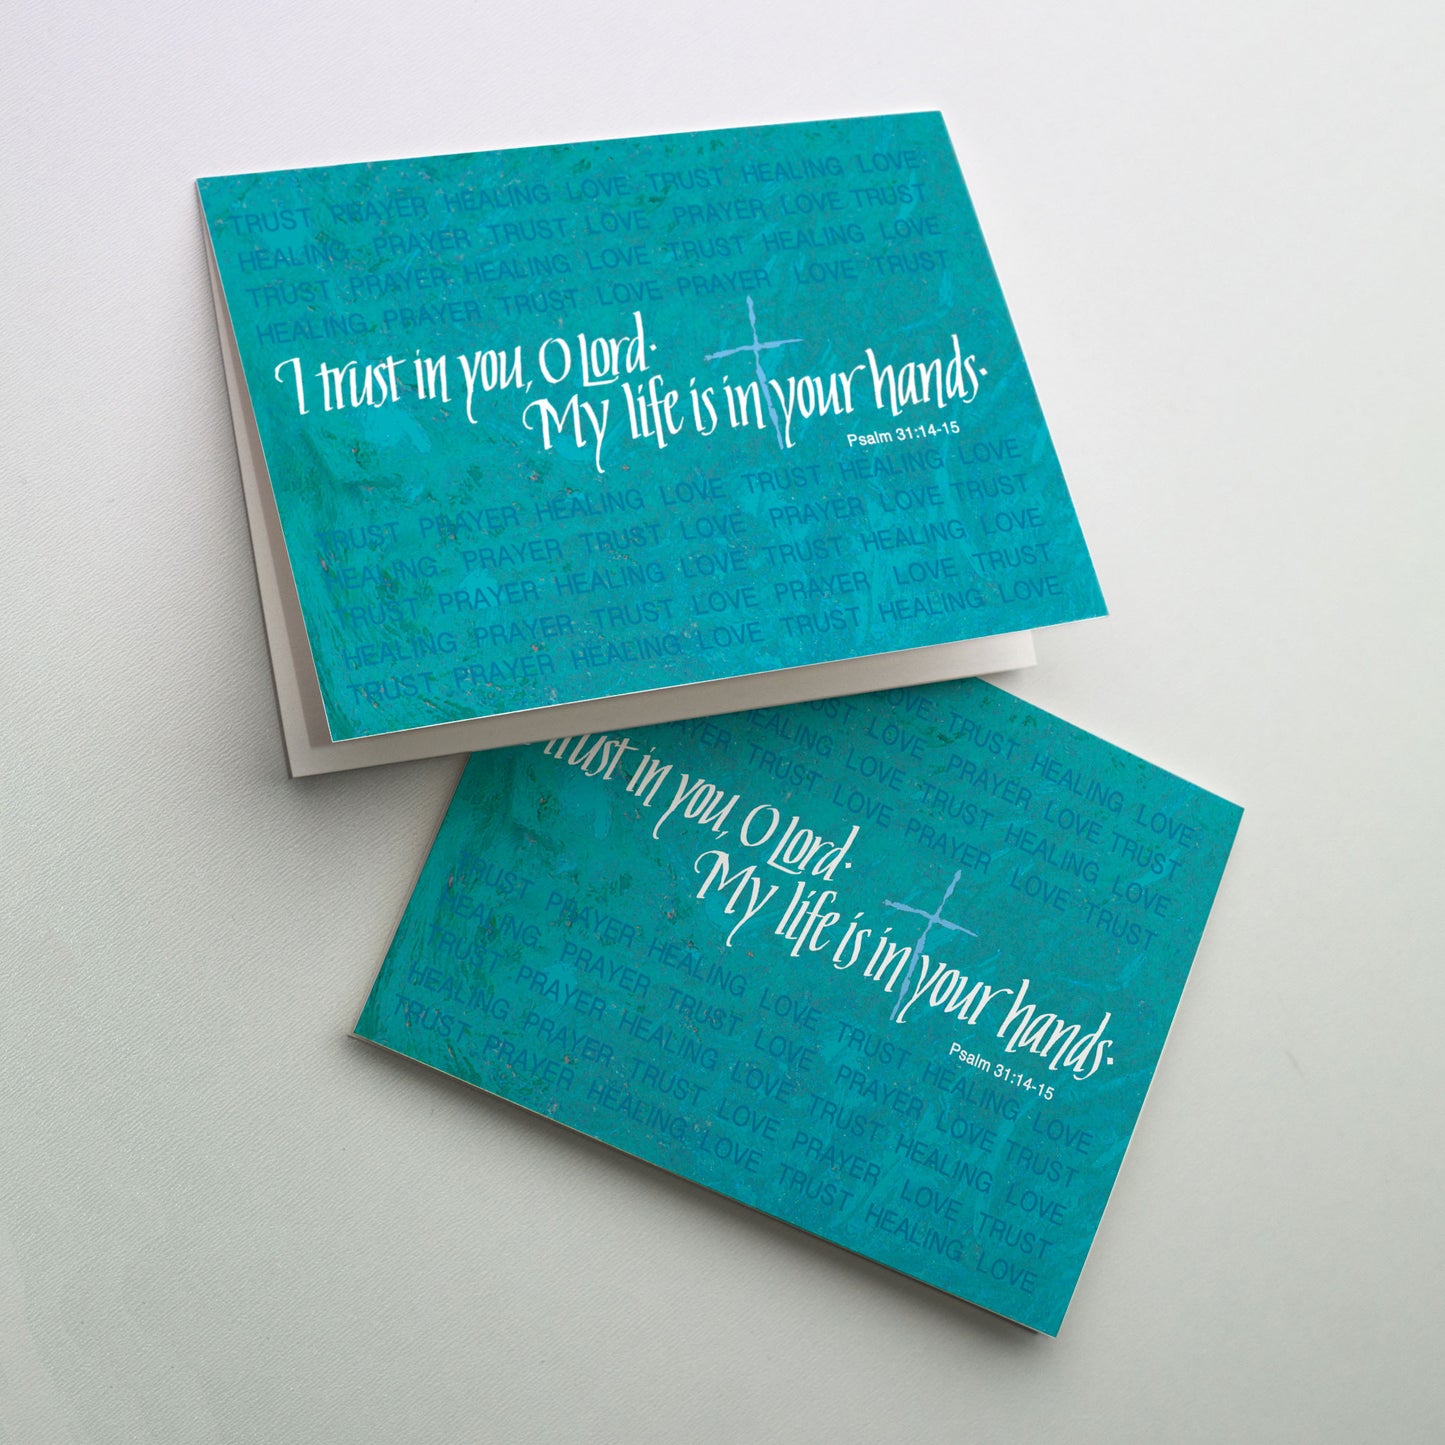 I Trust in You, O Lord - Encouragement Card